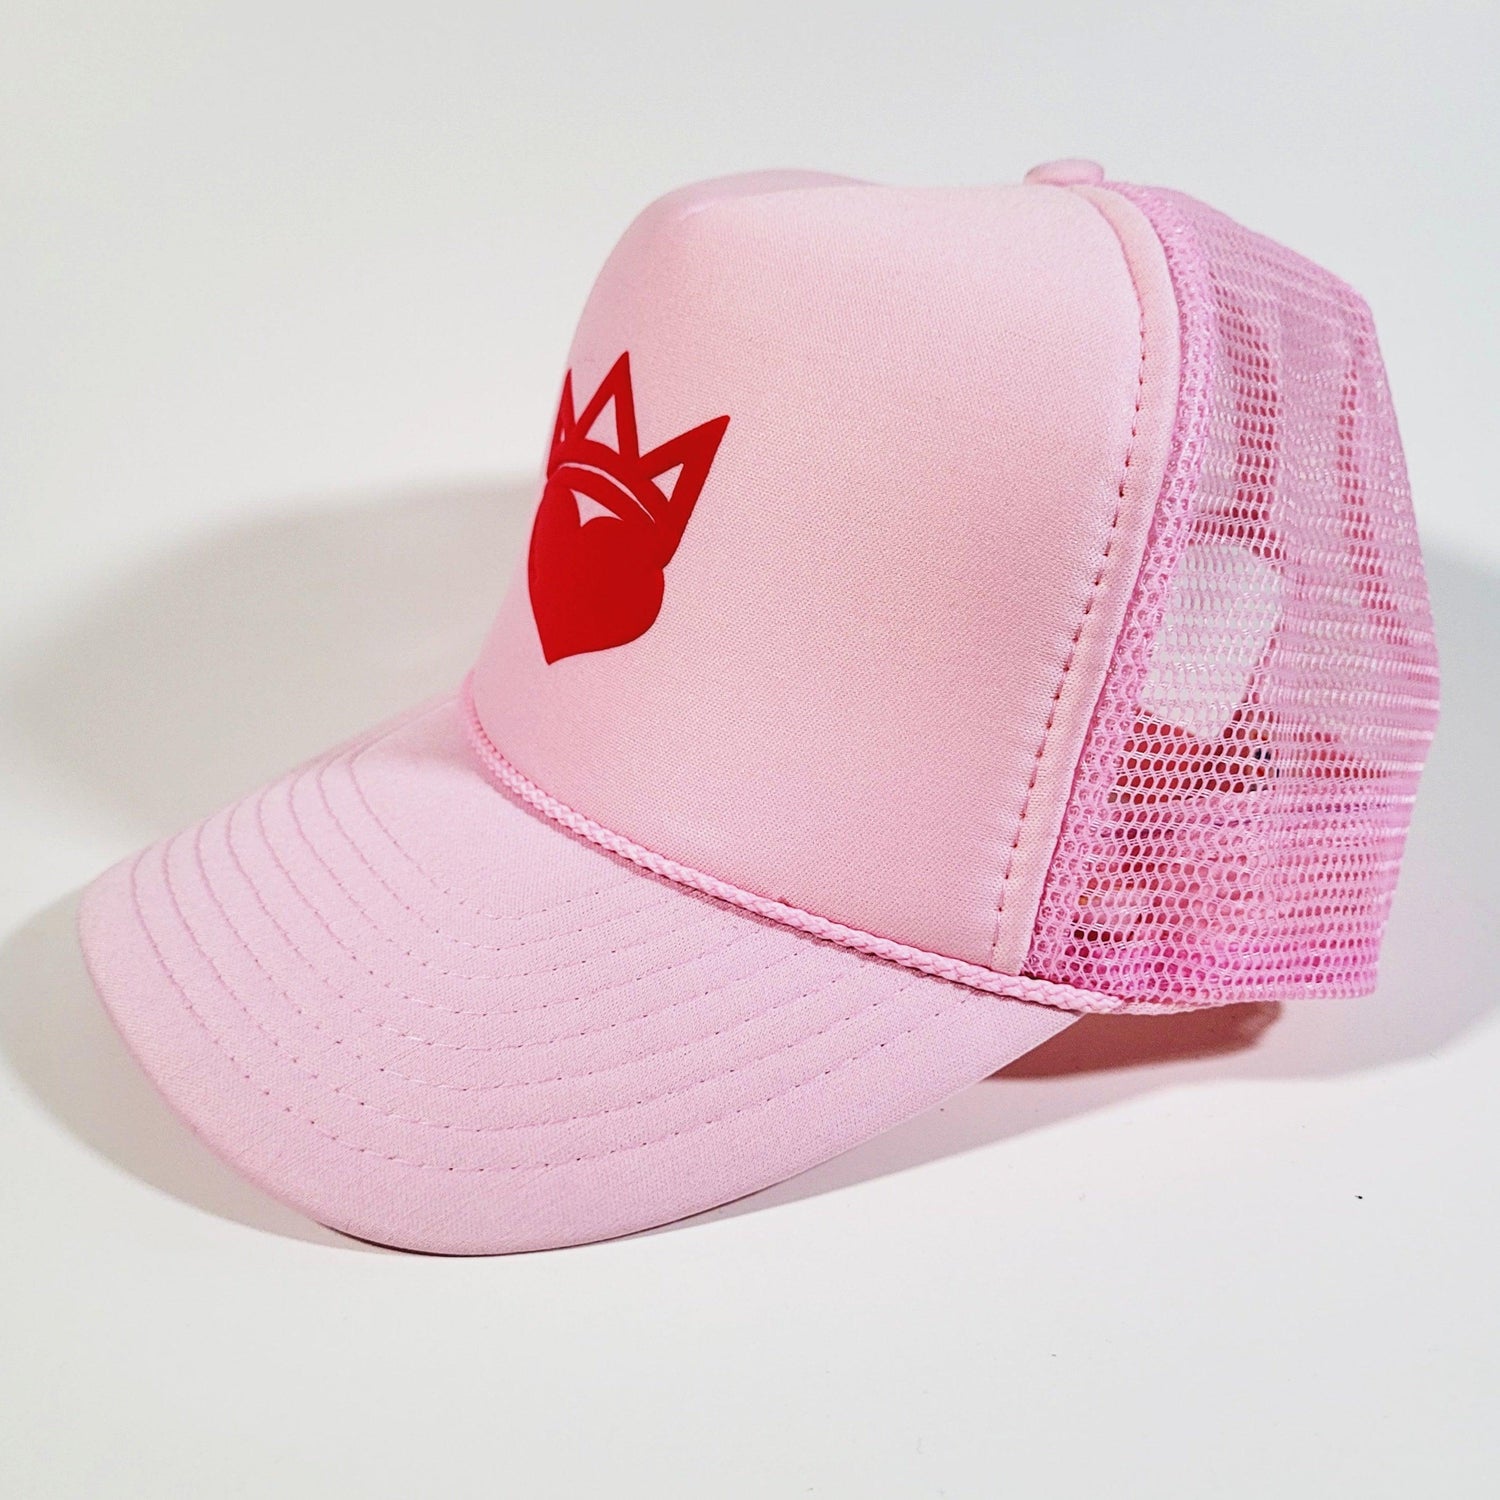 Light Pink & Red "King/Queen Of Hearts" Trucker Hat - Official Crown Store